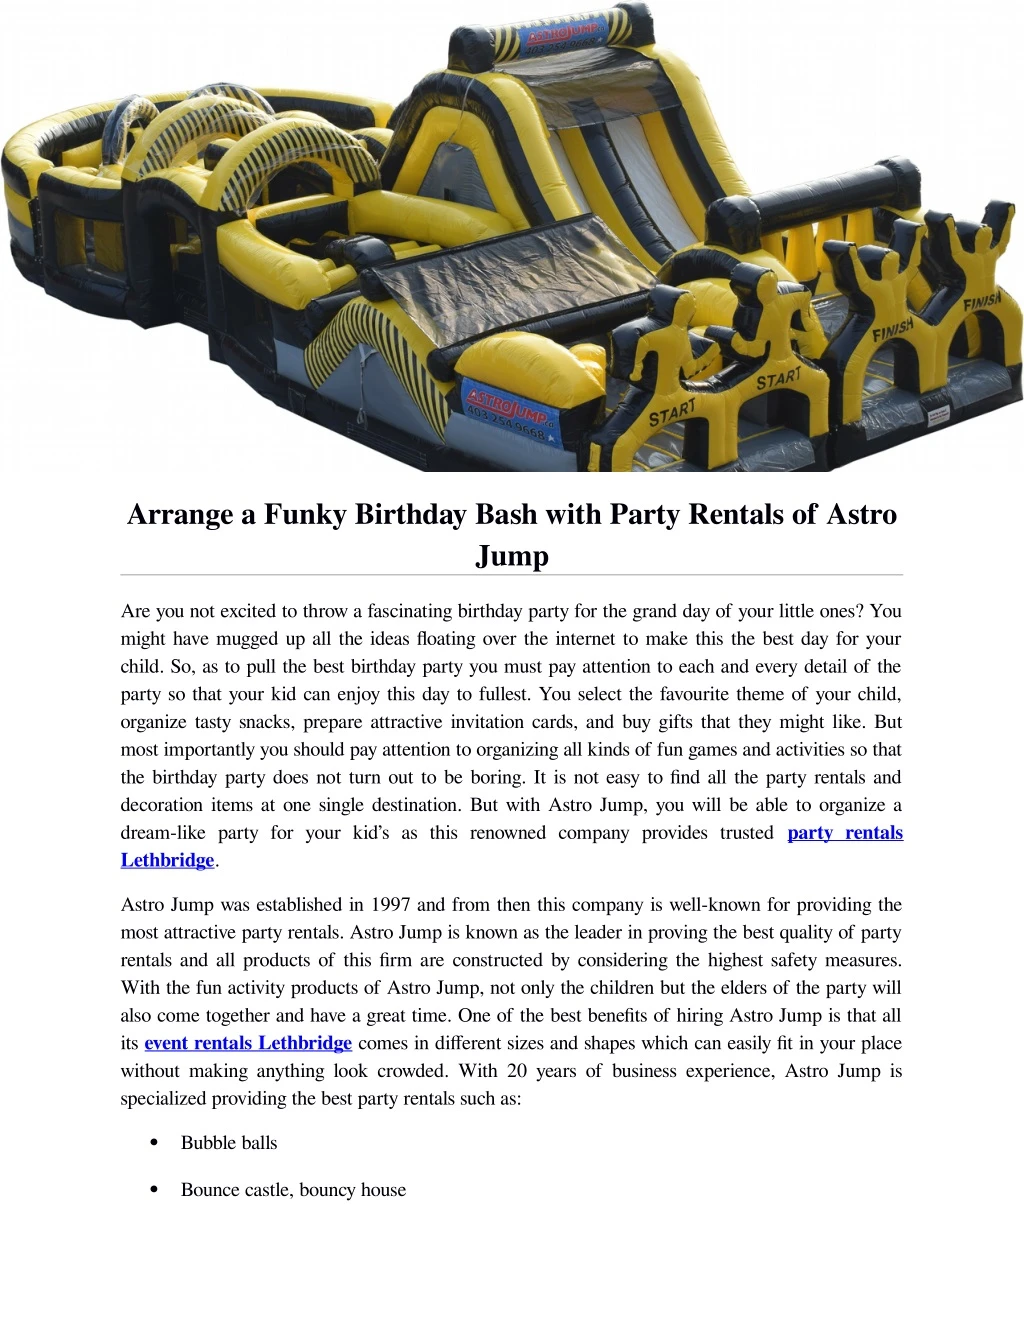 arrange a funky birthday bash with party rentals